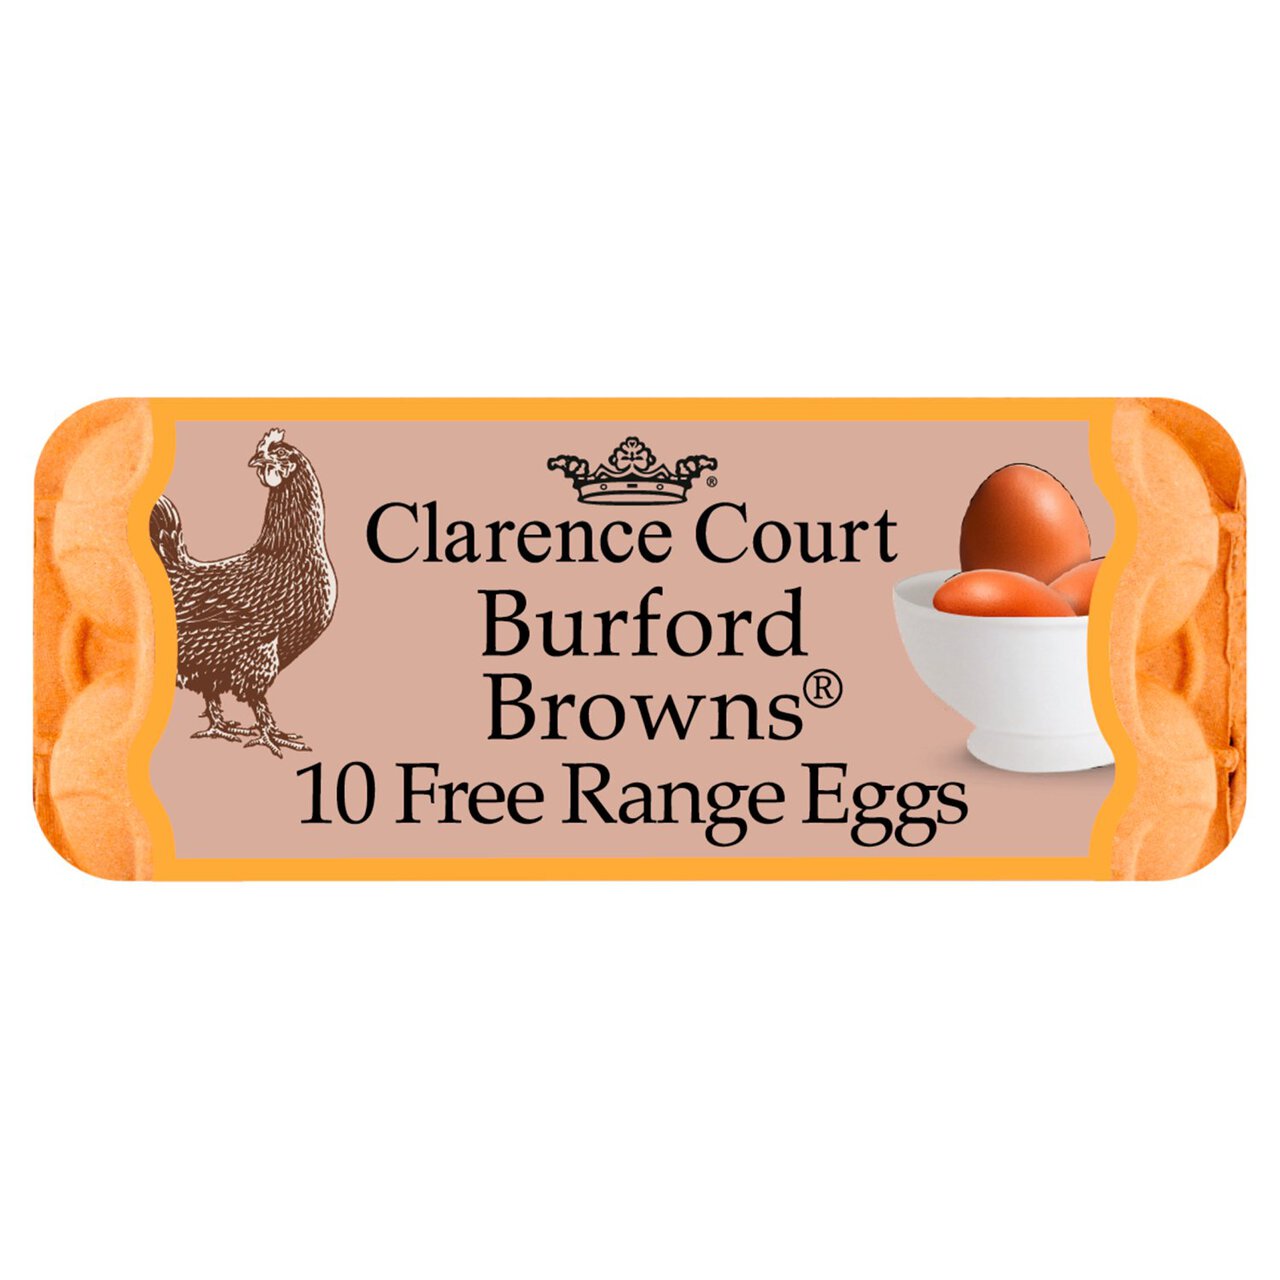 Clarence Court Burford Brown Mixed Free Range Eggs 10 per pack